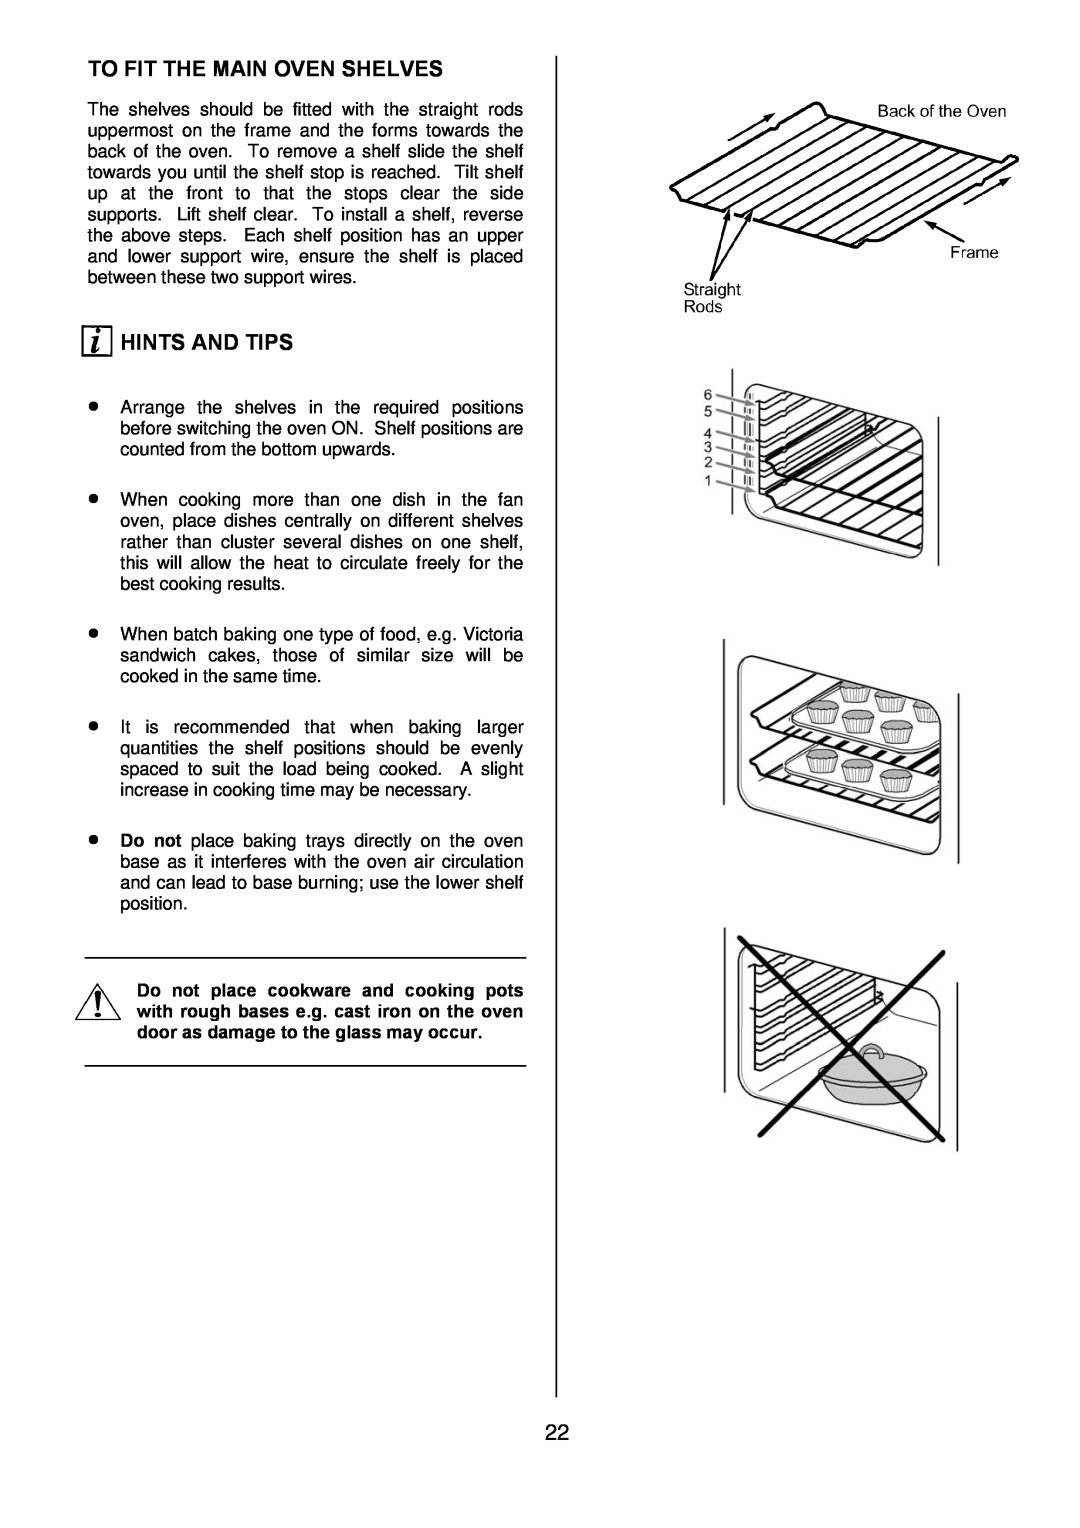 Electrolux D77000GF operating instructions To Fit The Main Oven Shelves, Hints And Tips 